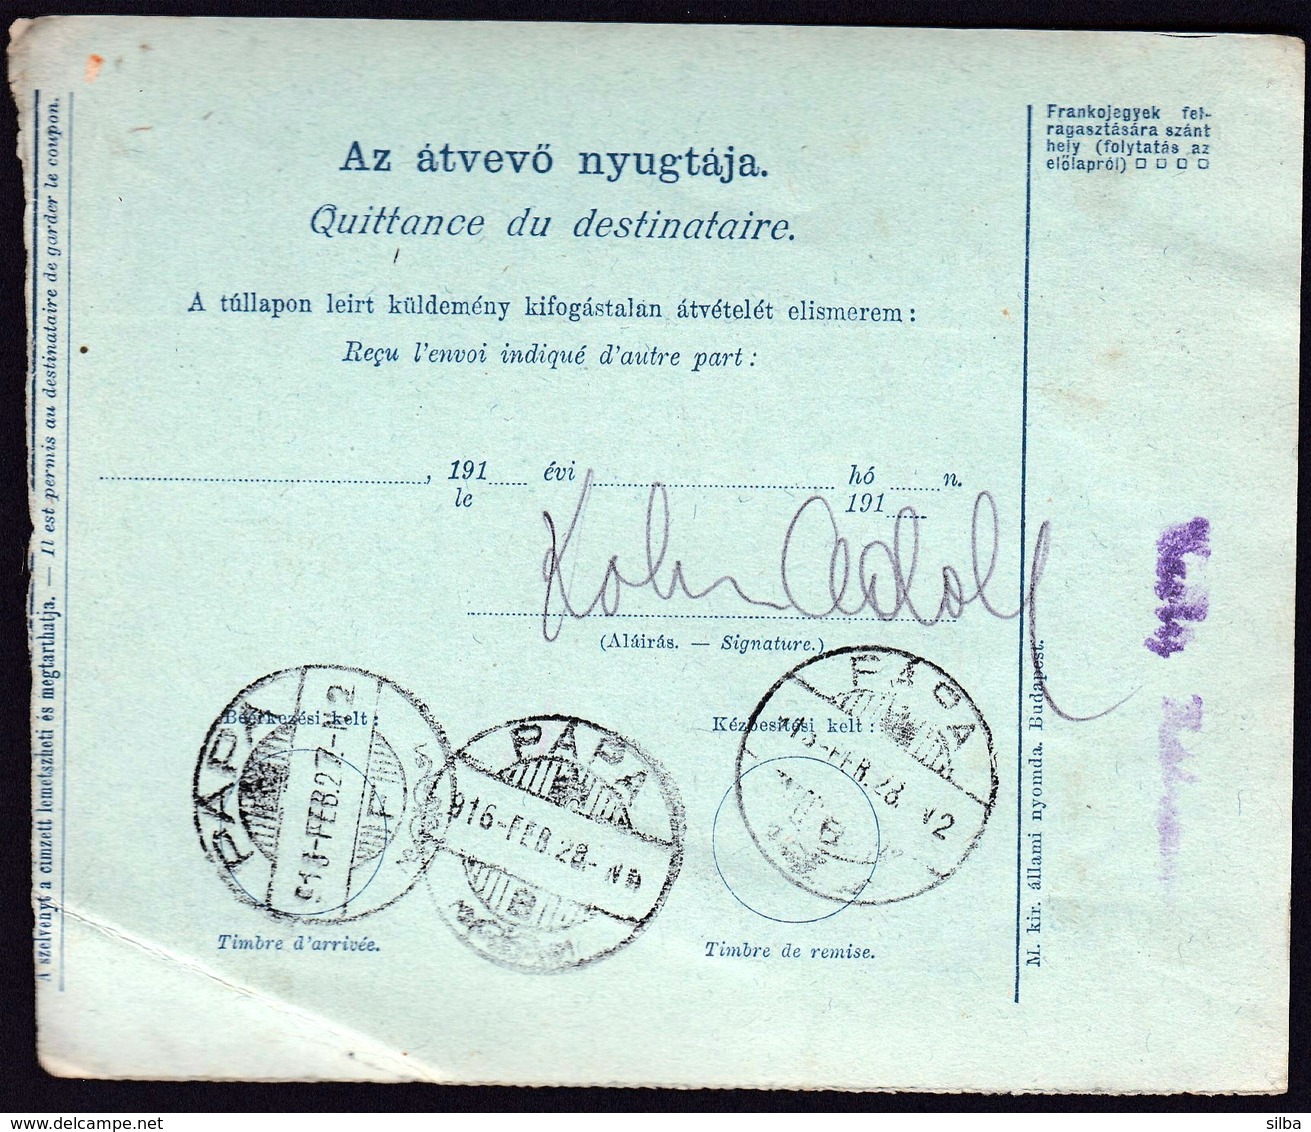 Hungary Tiszafured 1916 / Parcel Post, Postai Szallitolevel, Bulletin D' Expedition / To Papa - Paquetes Postales